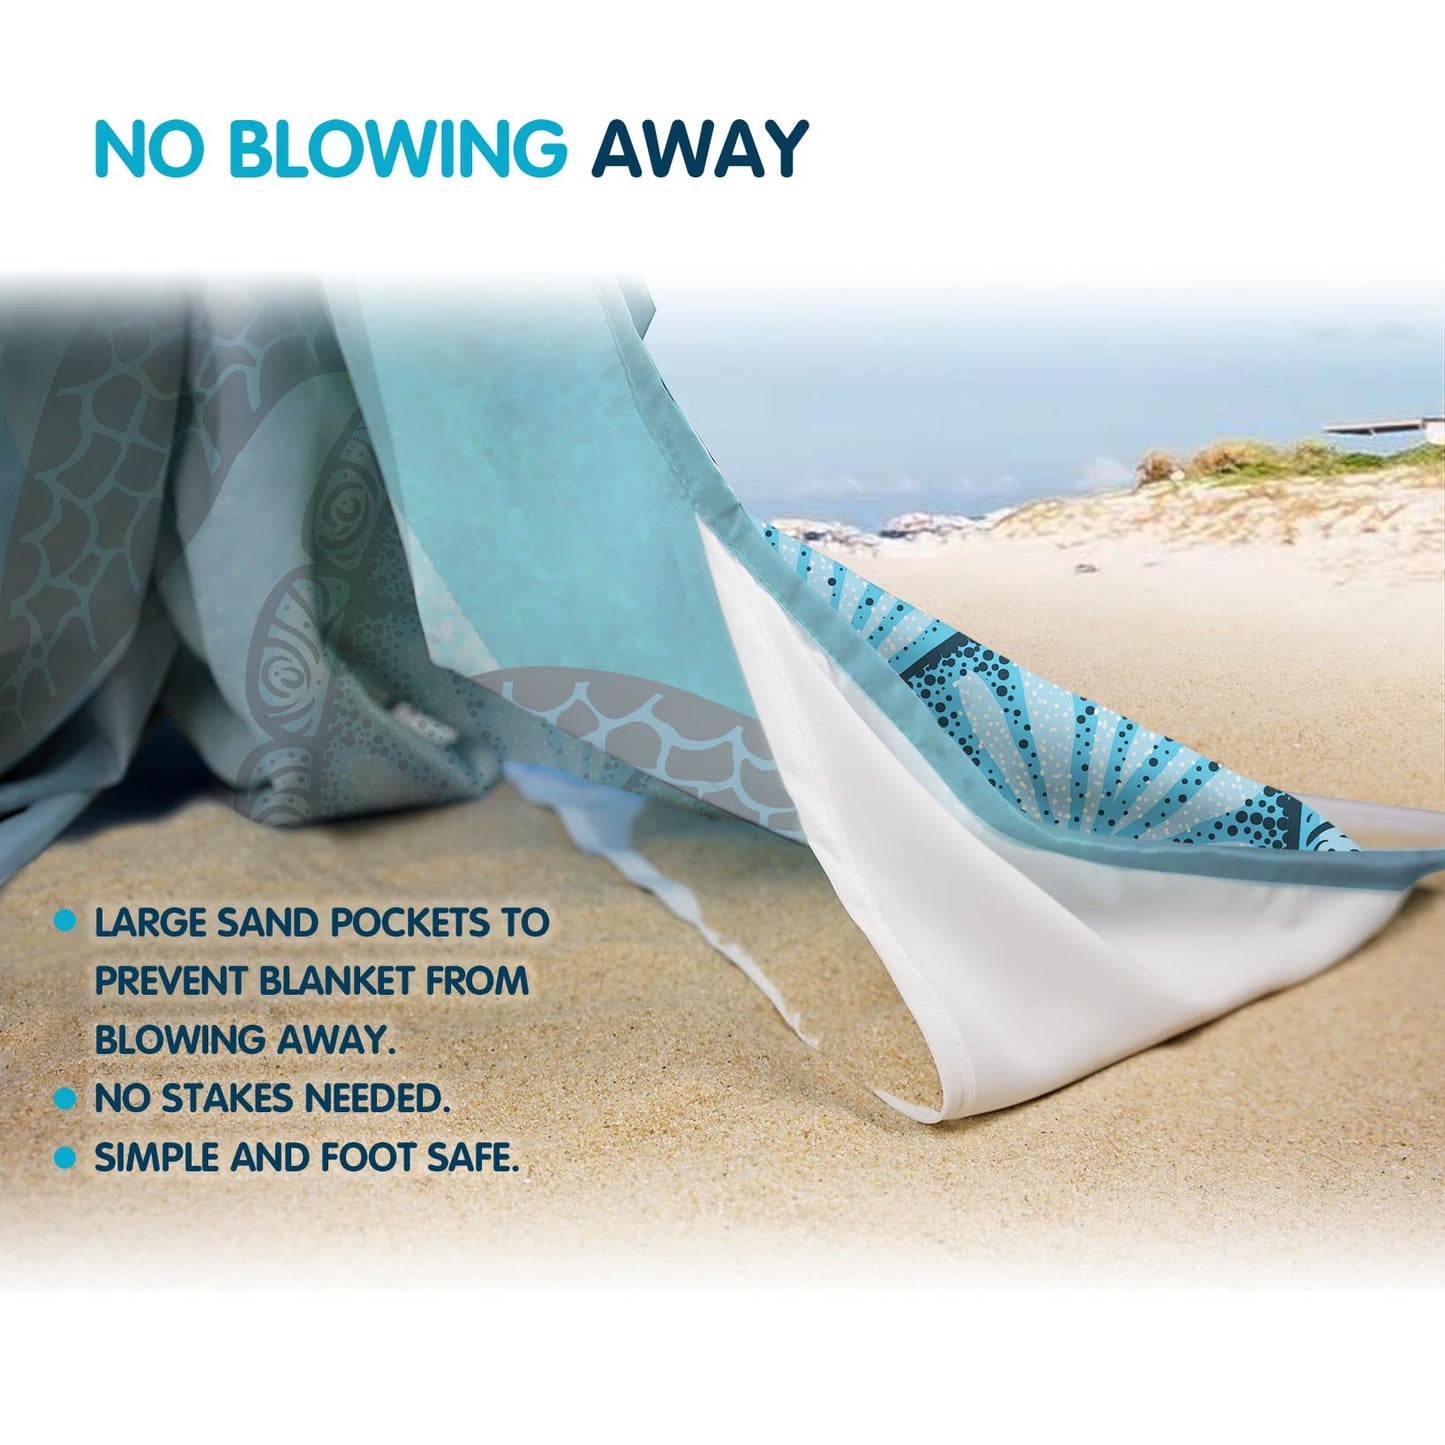 Sunlit 106"x81" Large Soft Sand Poof Beach Blanket with Corner Pockets and Mesh Bag for Beach Party, Travel, Camping and Outdoor Picnic, Light Weight and Portable, Sea Turtle Blue Wave